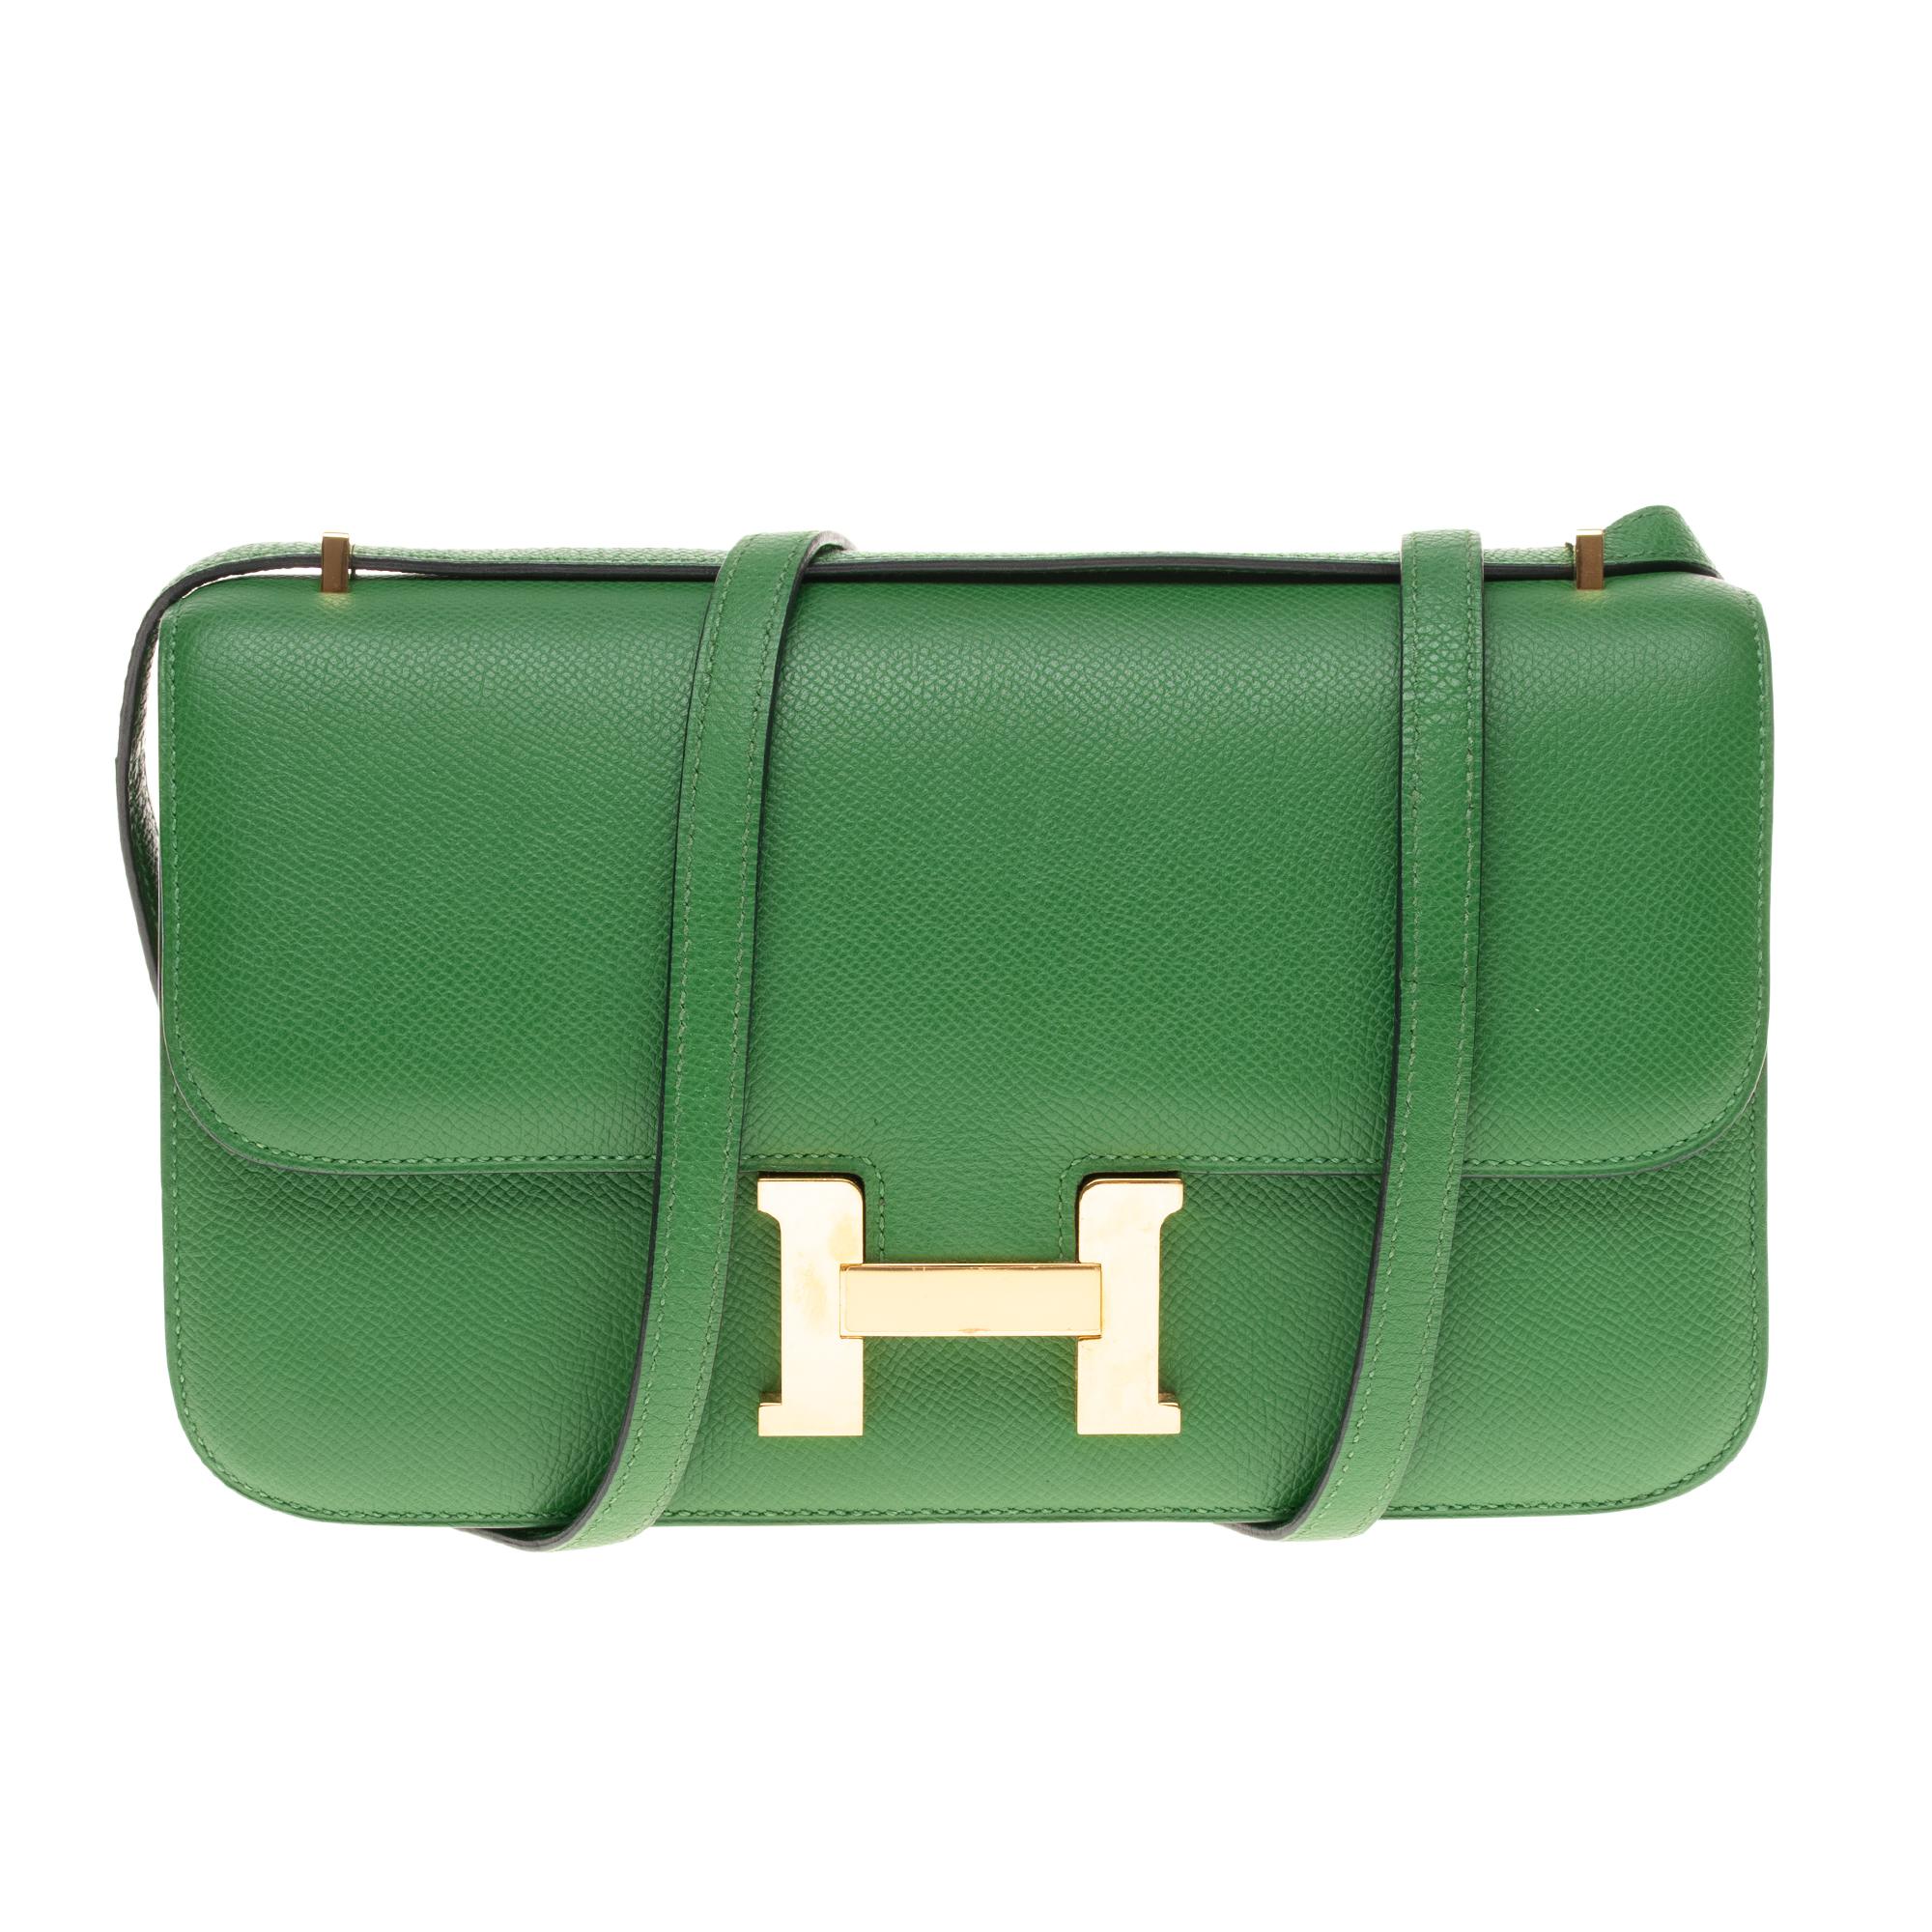 Charming Hermes Constance Elan Handbag in green epsom leather, gold metal trim, a transformable handle in green leather allowing a hand stand or shoulder or shoulder strap

Closure marked on flap
Green leather inner lining, 2 compartments, two patch